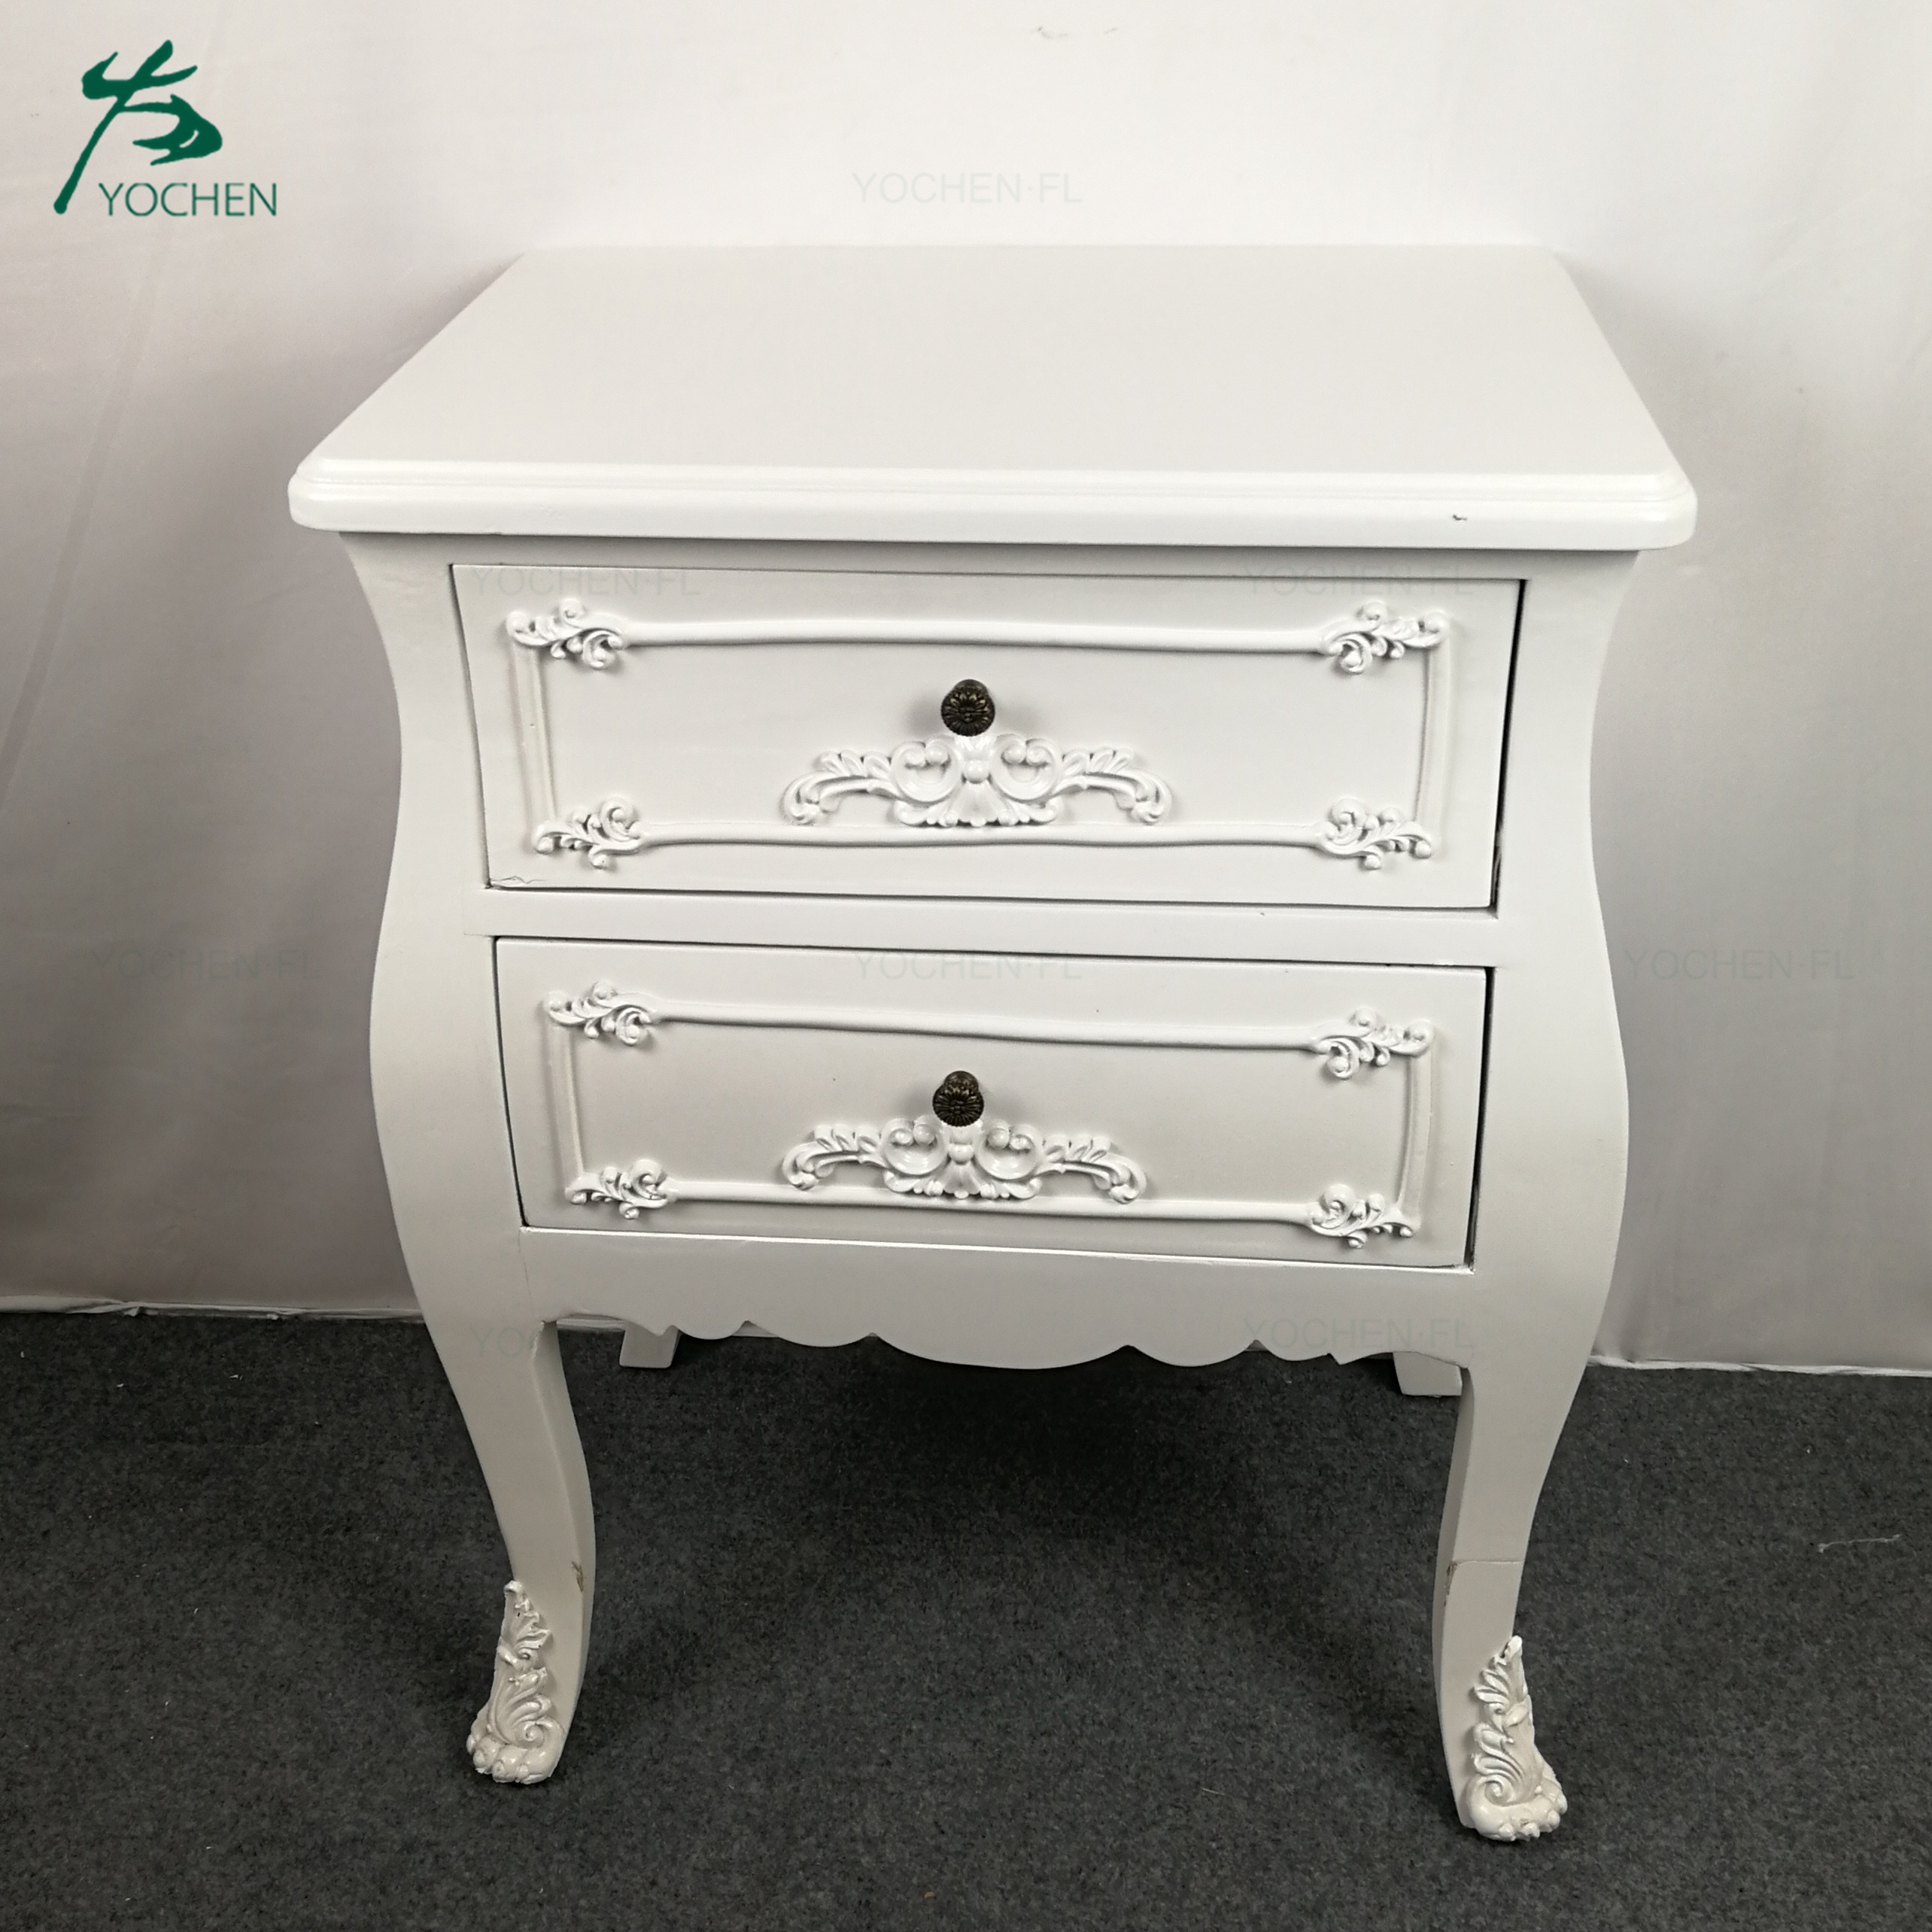 rice white color nice quality noble European style nightstand